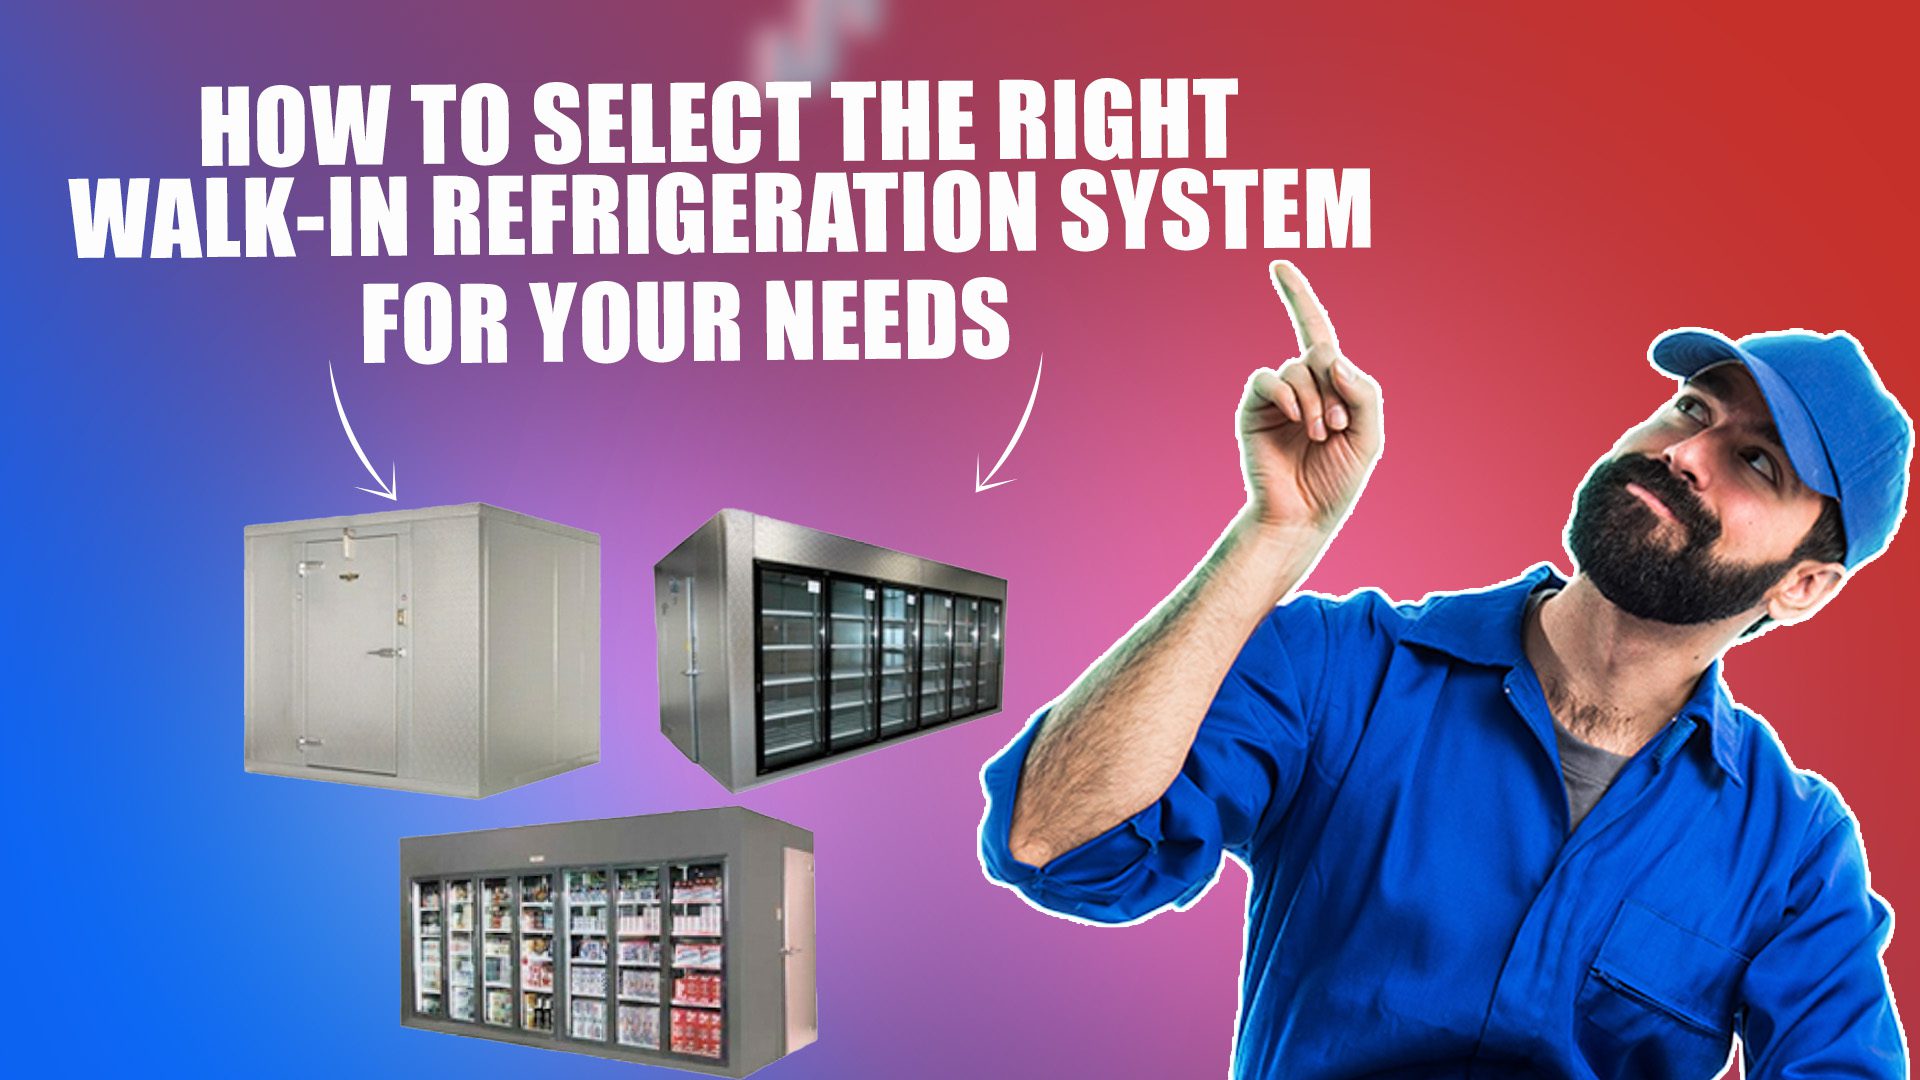 How to Select the Right Walk-in Refrigeration System for Your Needs